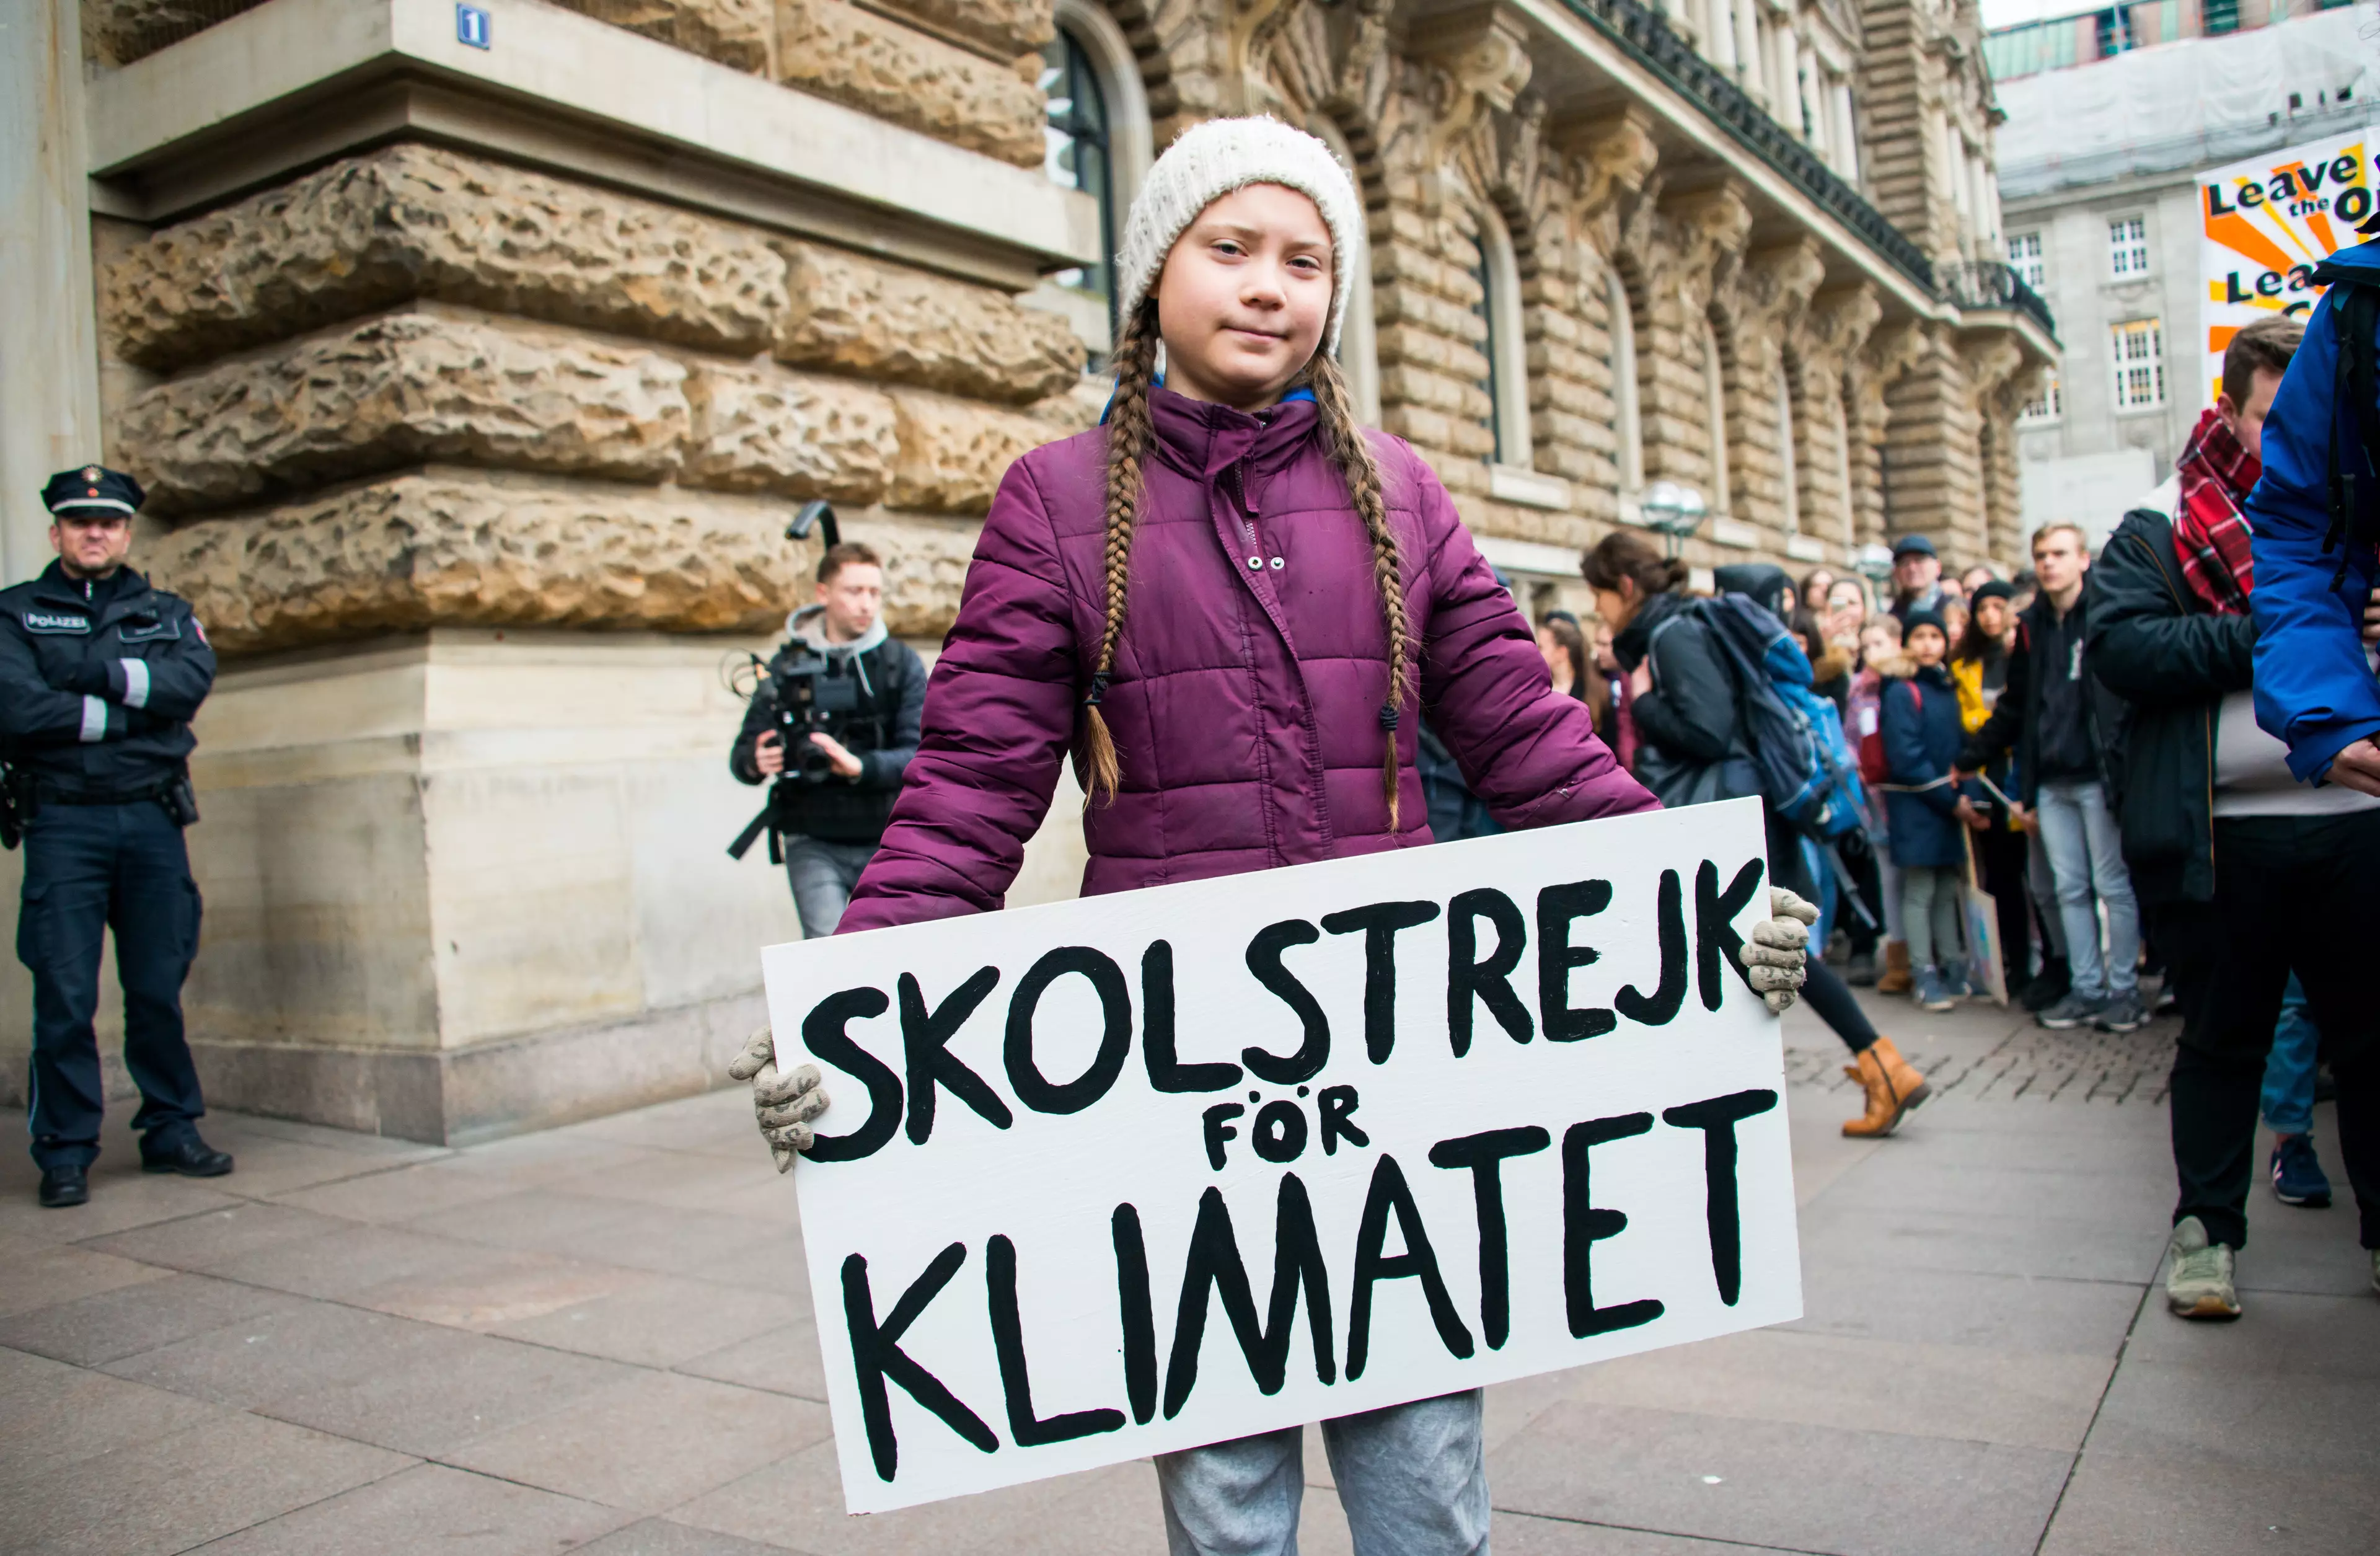 At just 16-years-old, Greta is a climate change activist.